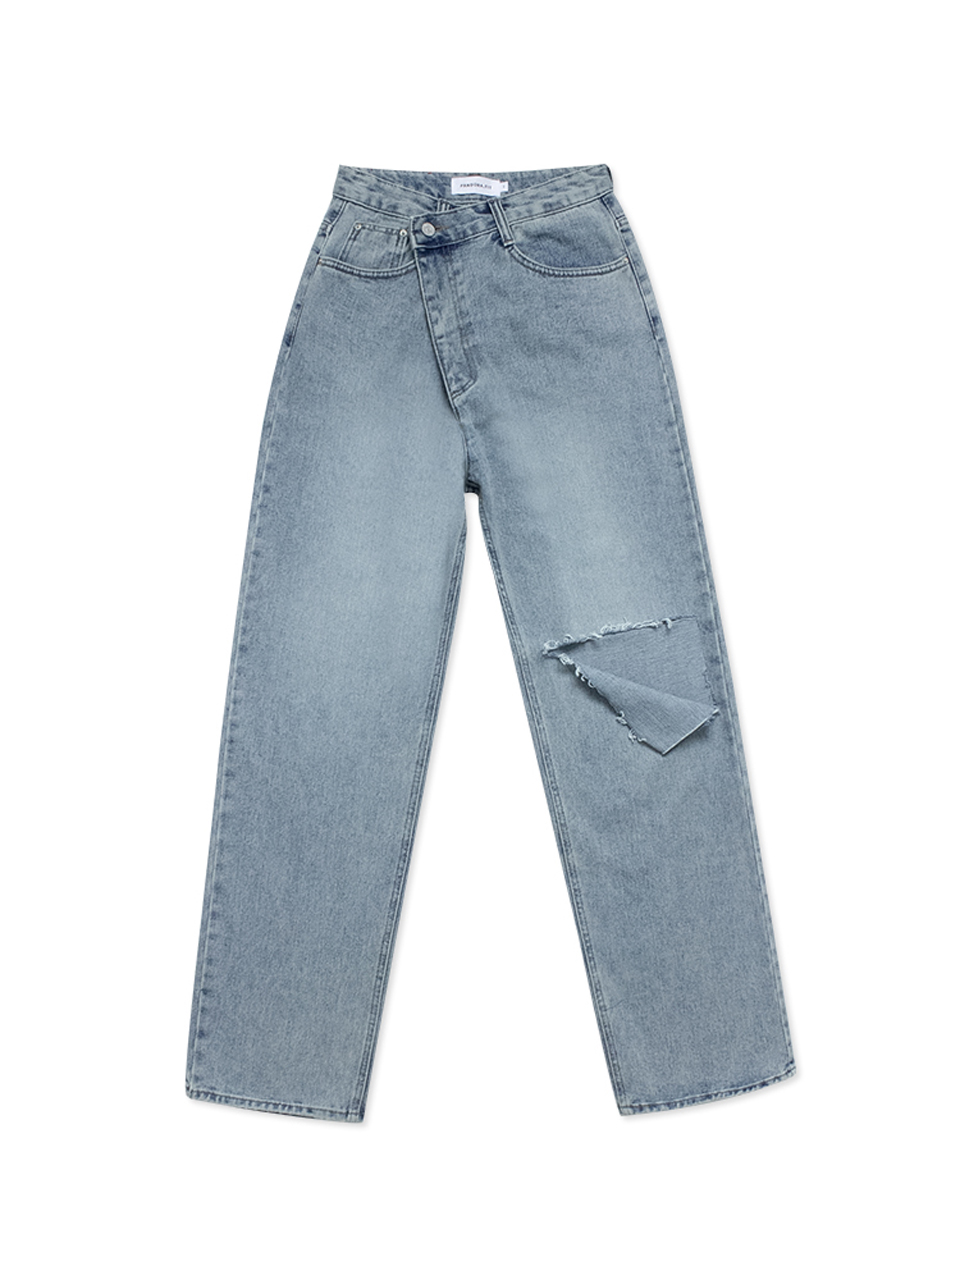 [WIDE] Record Jeans